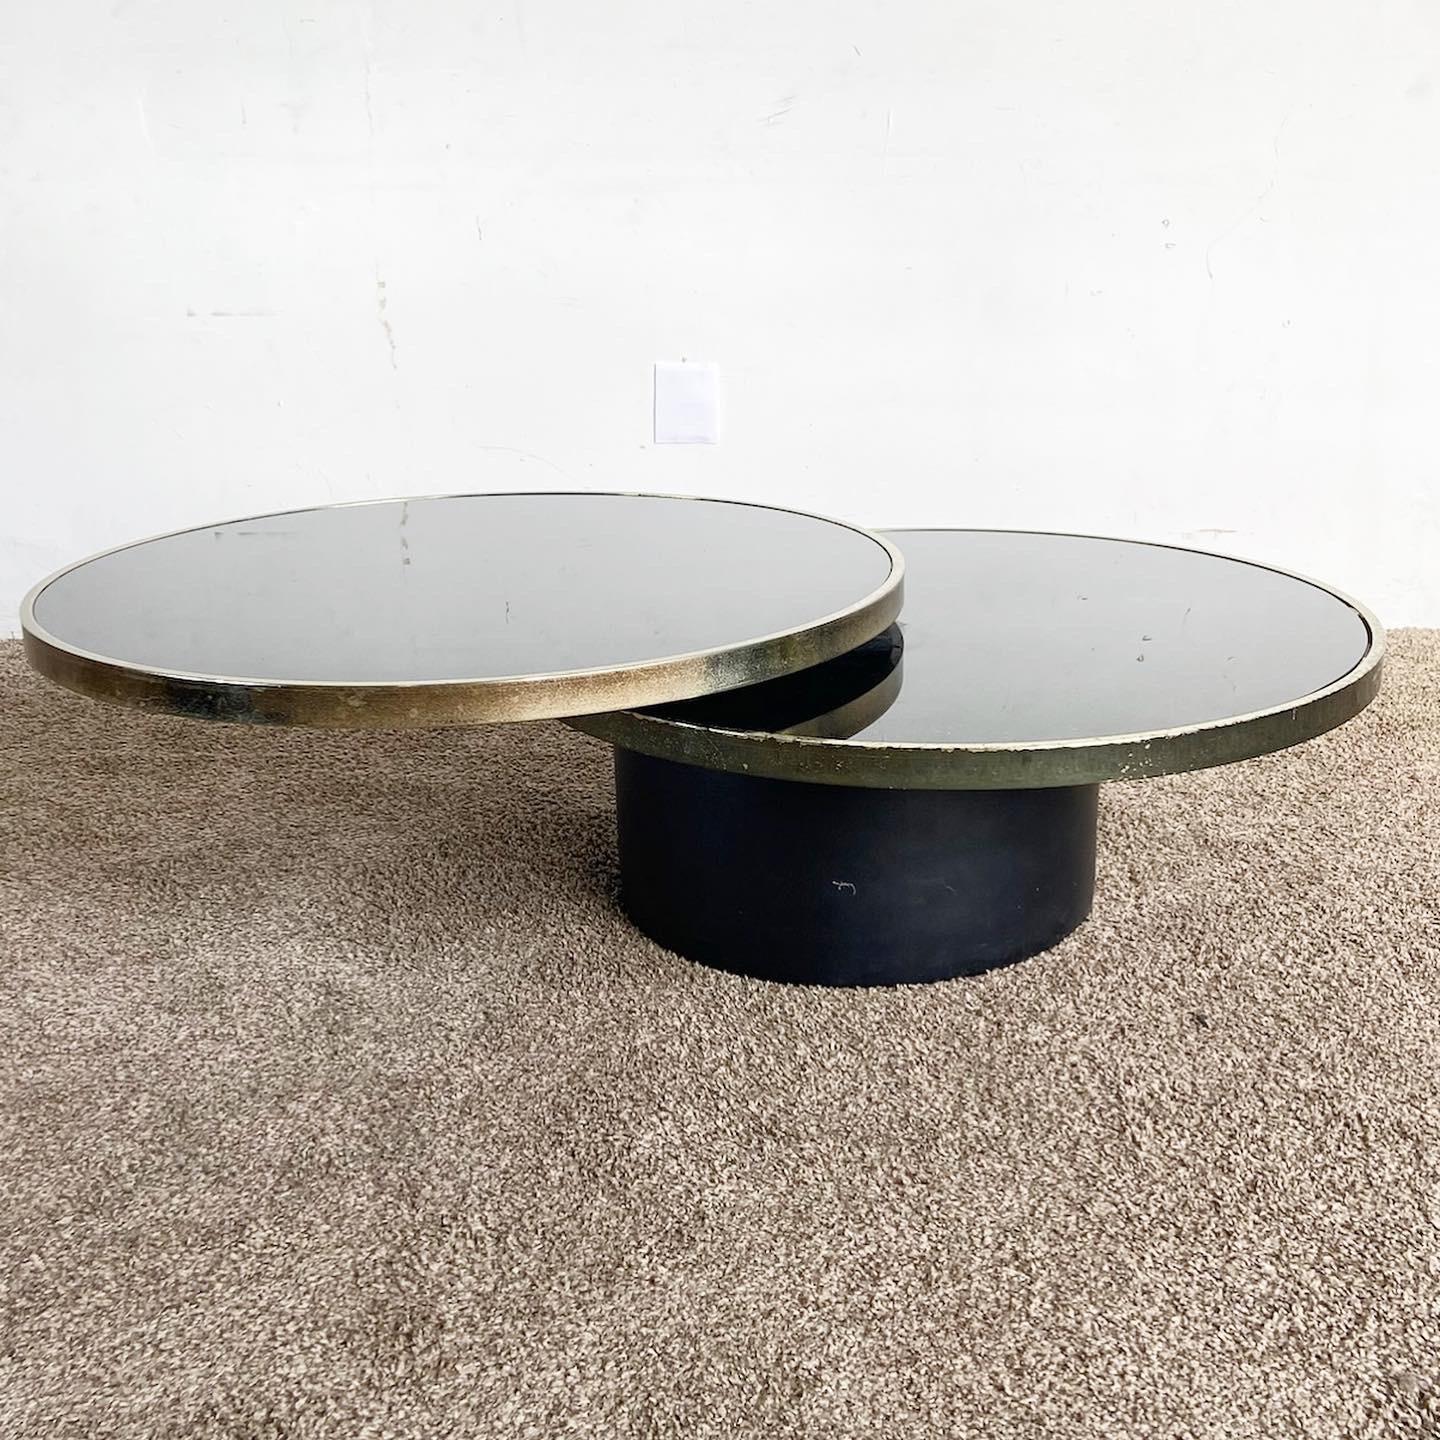 Elevate your space with our Postmodern Black and Gold Swivel Glass Top Coffee Table, offering an innovative design and dynamic display for any contemporary setting.

Two-tier design, each with a black inlaid glass top, adds a modern touch.
Upper